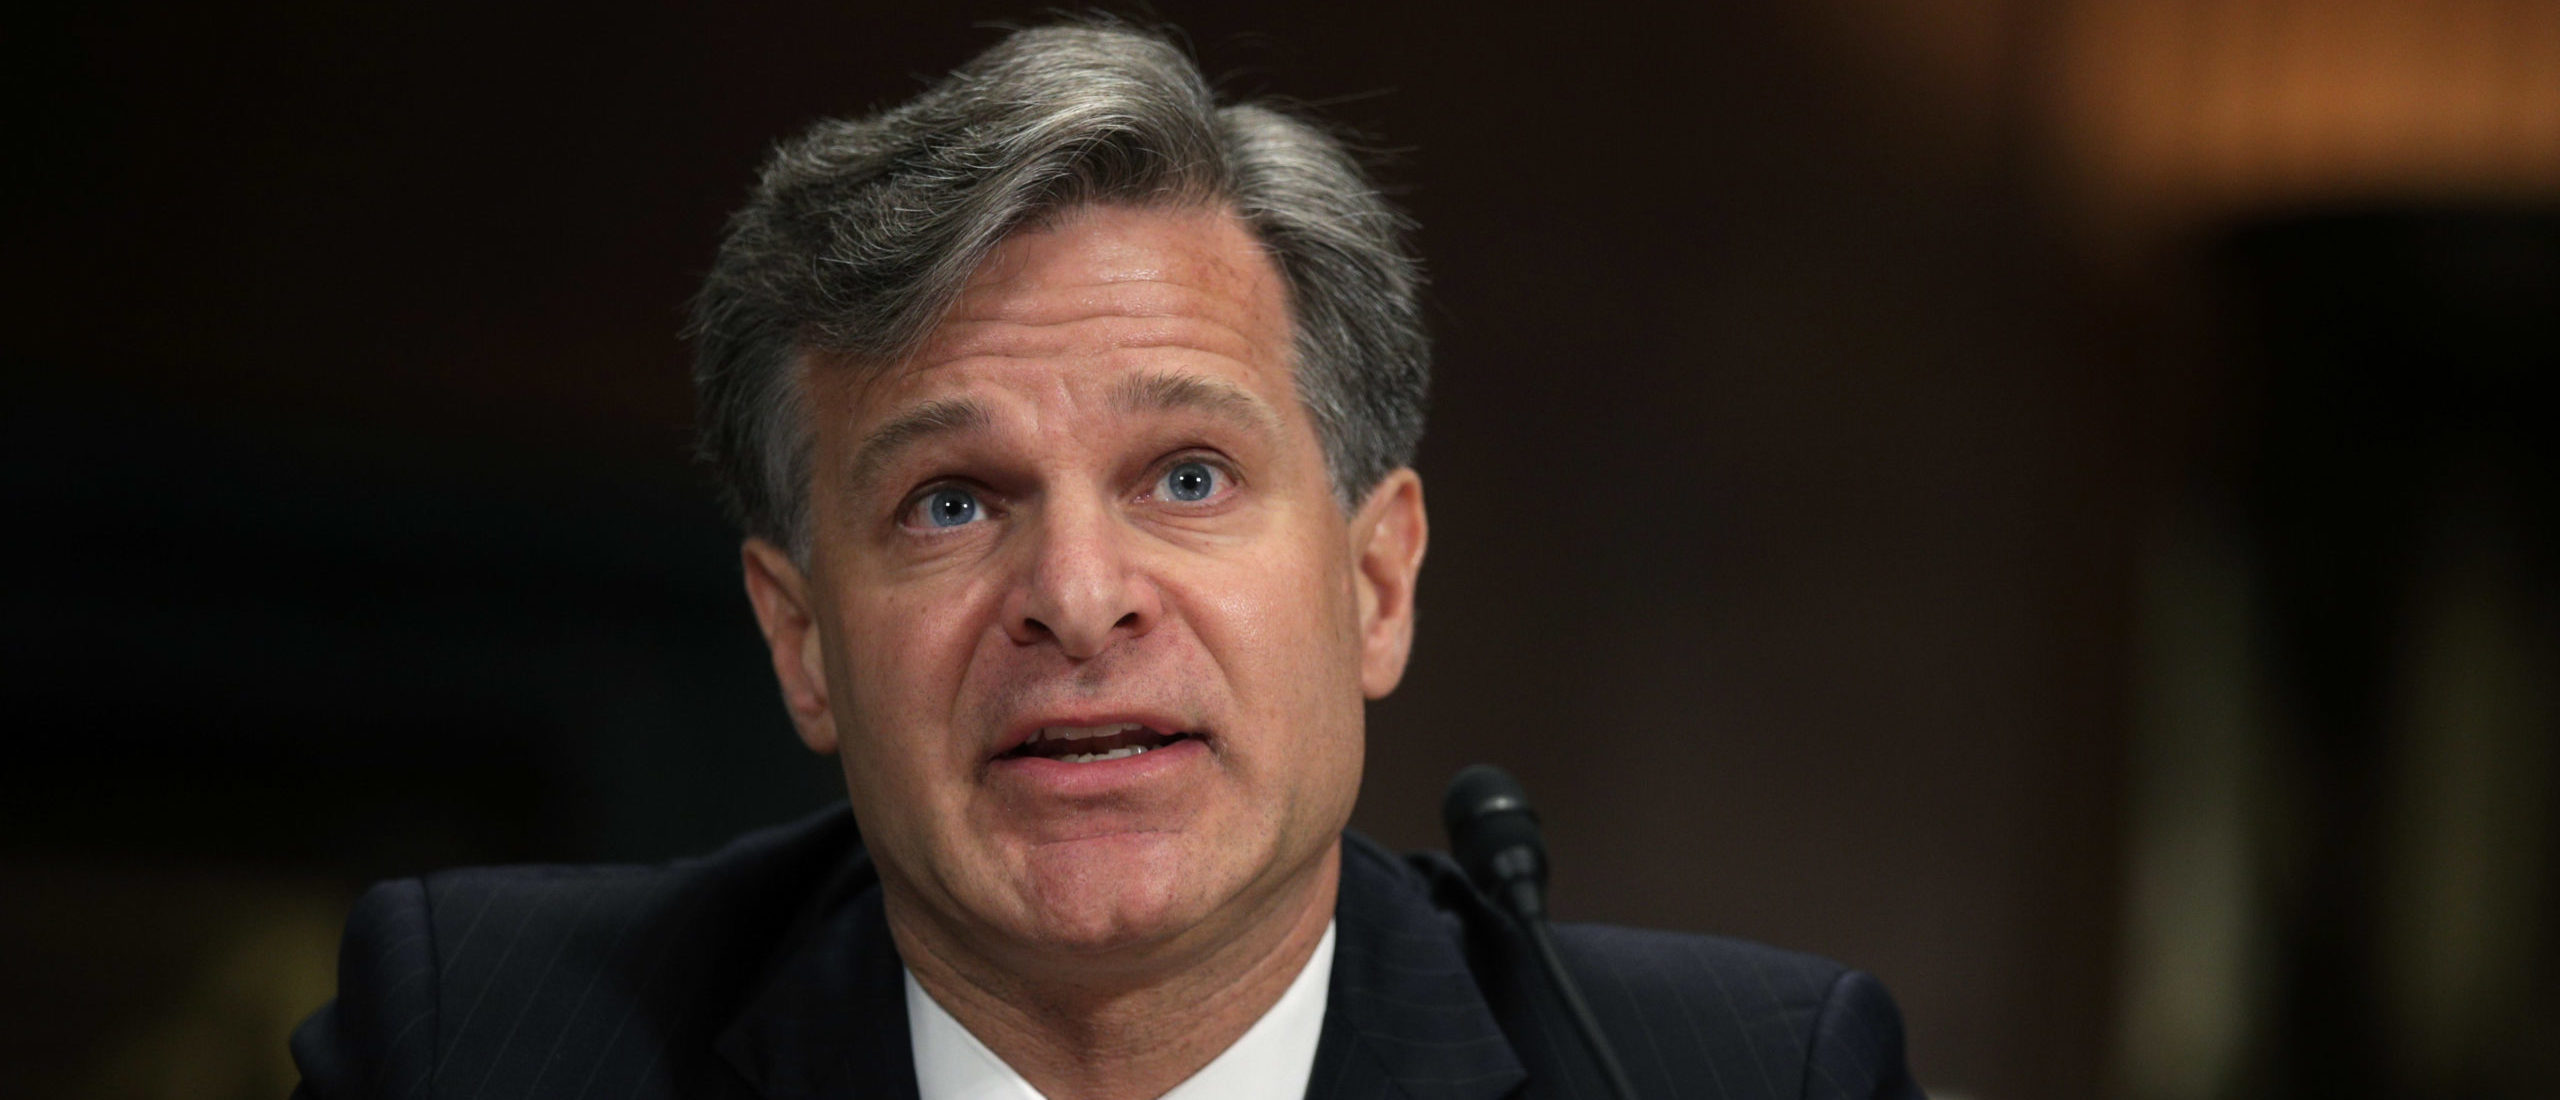 WASHINGTON, DC - JULY 12: FBI director nominee Christopher Wray testifies during his confirmation hearing before the Senate Judiciary Committee July 12, 2017 on Capitol Hill in Washington, DC.